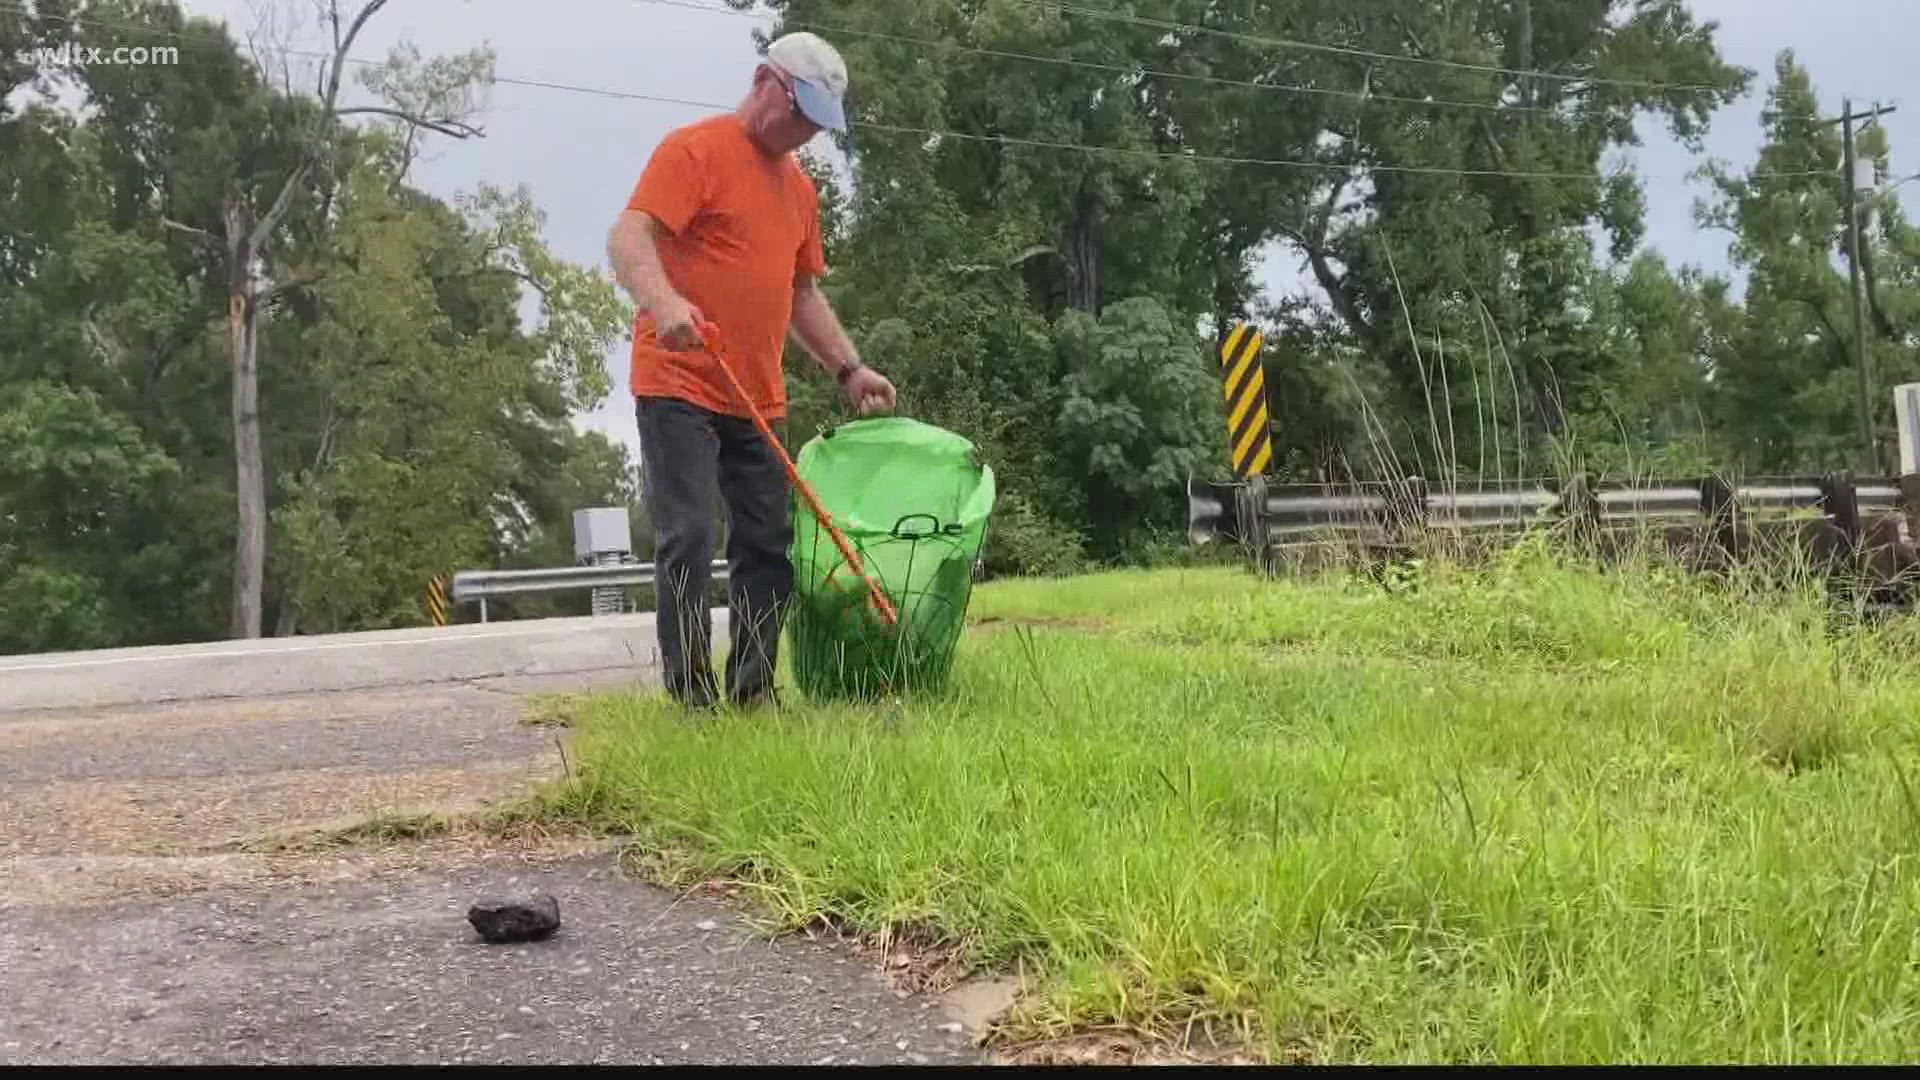 Longtime Orangeburg resident Pat Milhouse has been picking up trash in his neighborhood for about seven years.